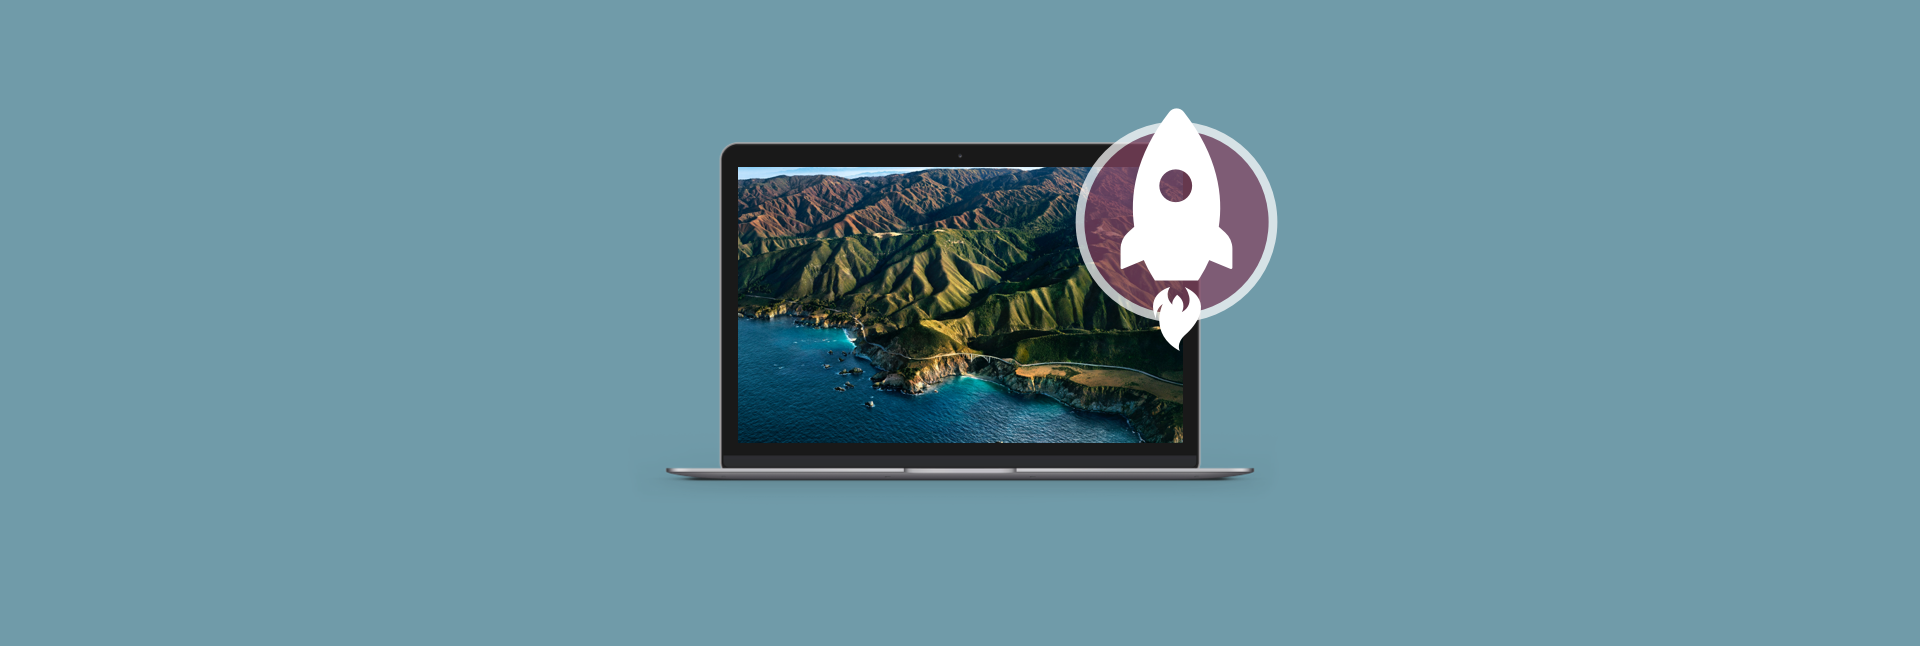 how to free up space on mac ram